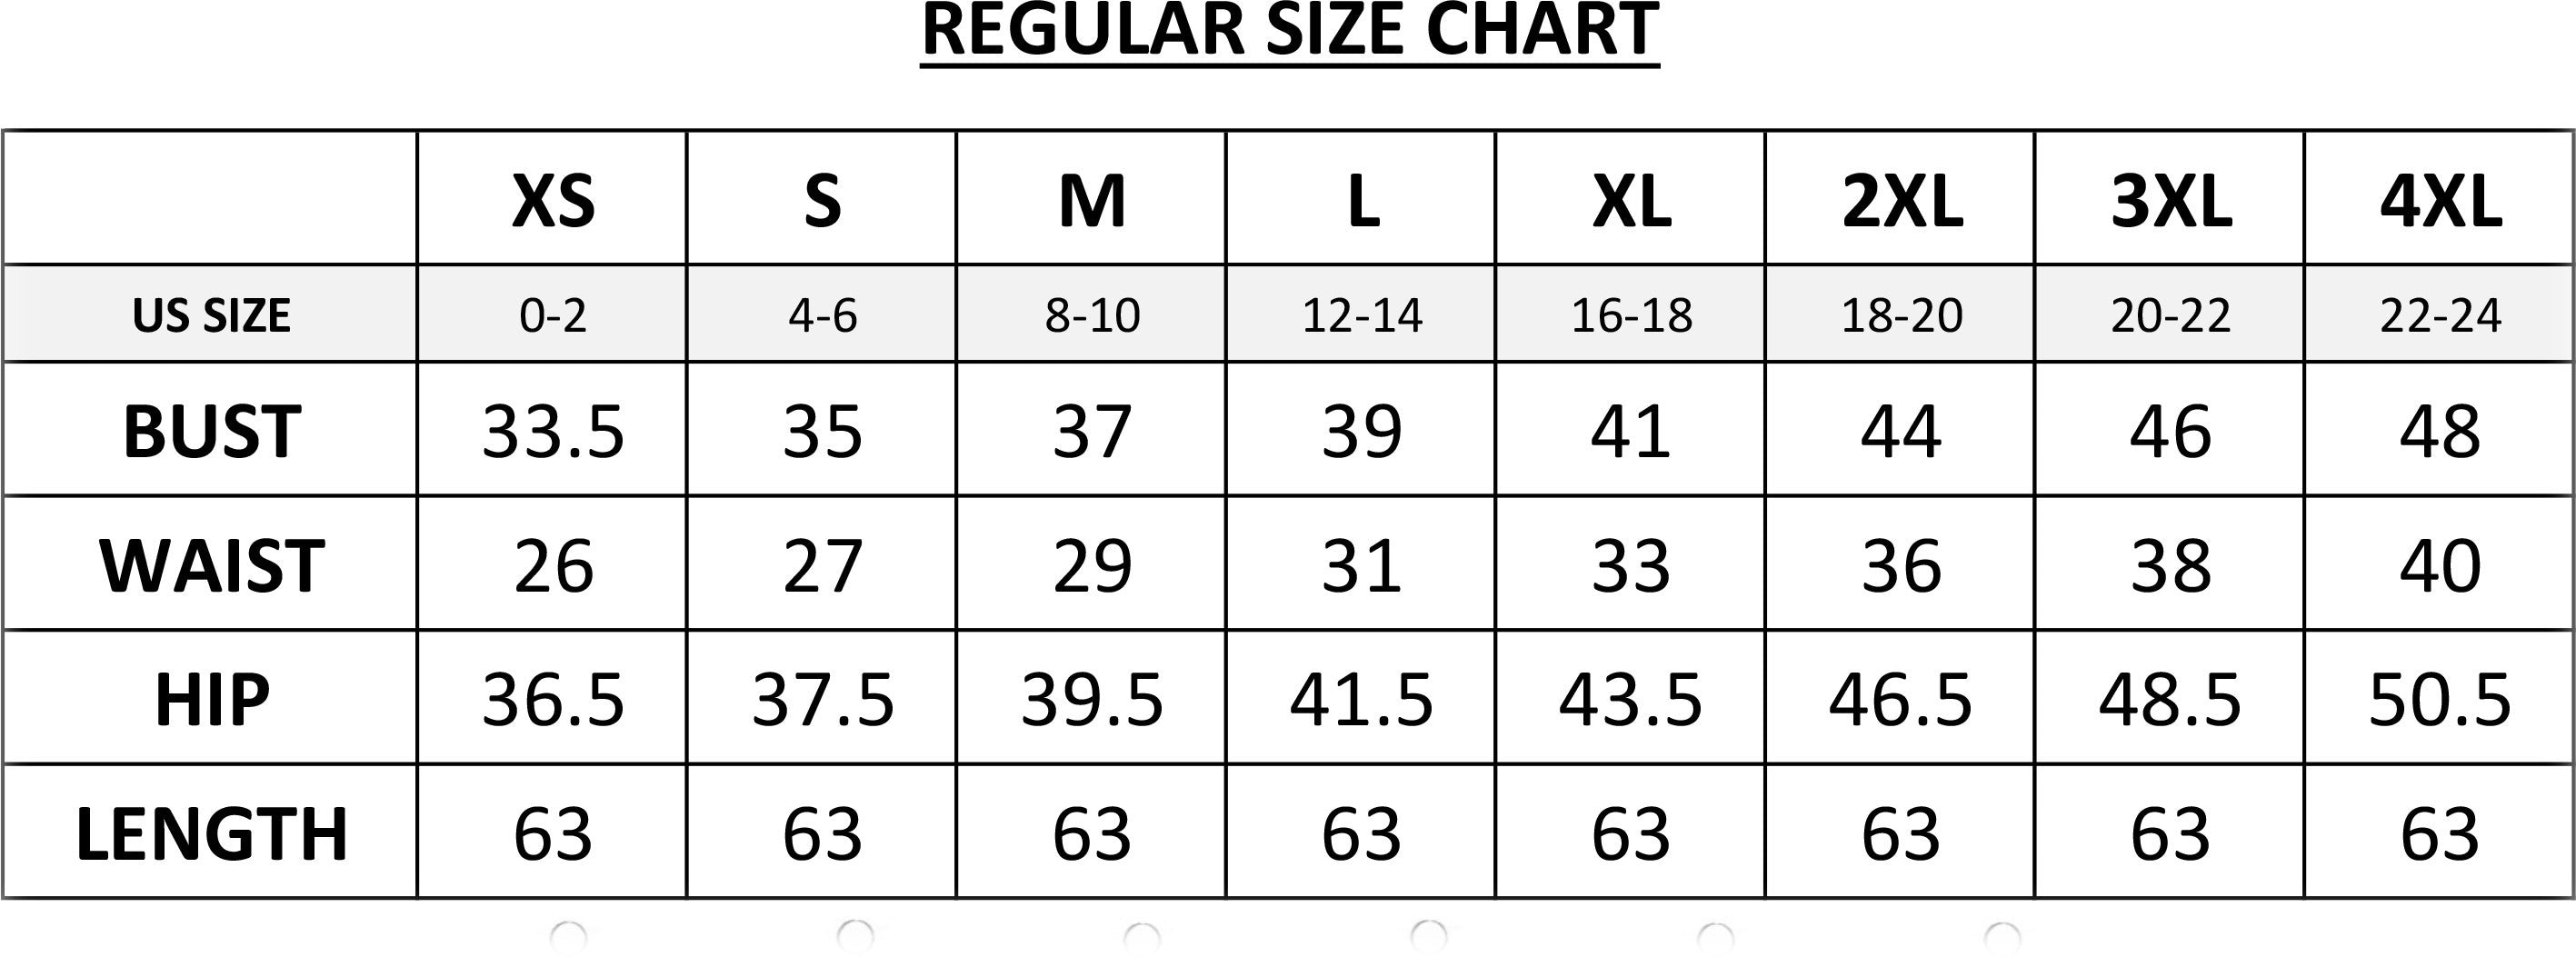 a women's size chart for the regular size chart